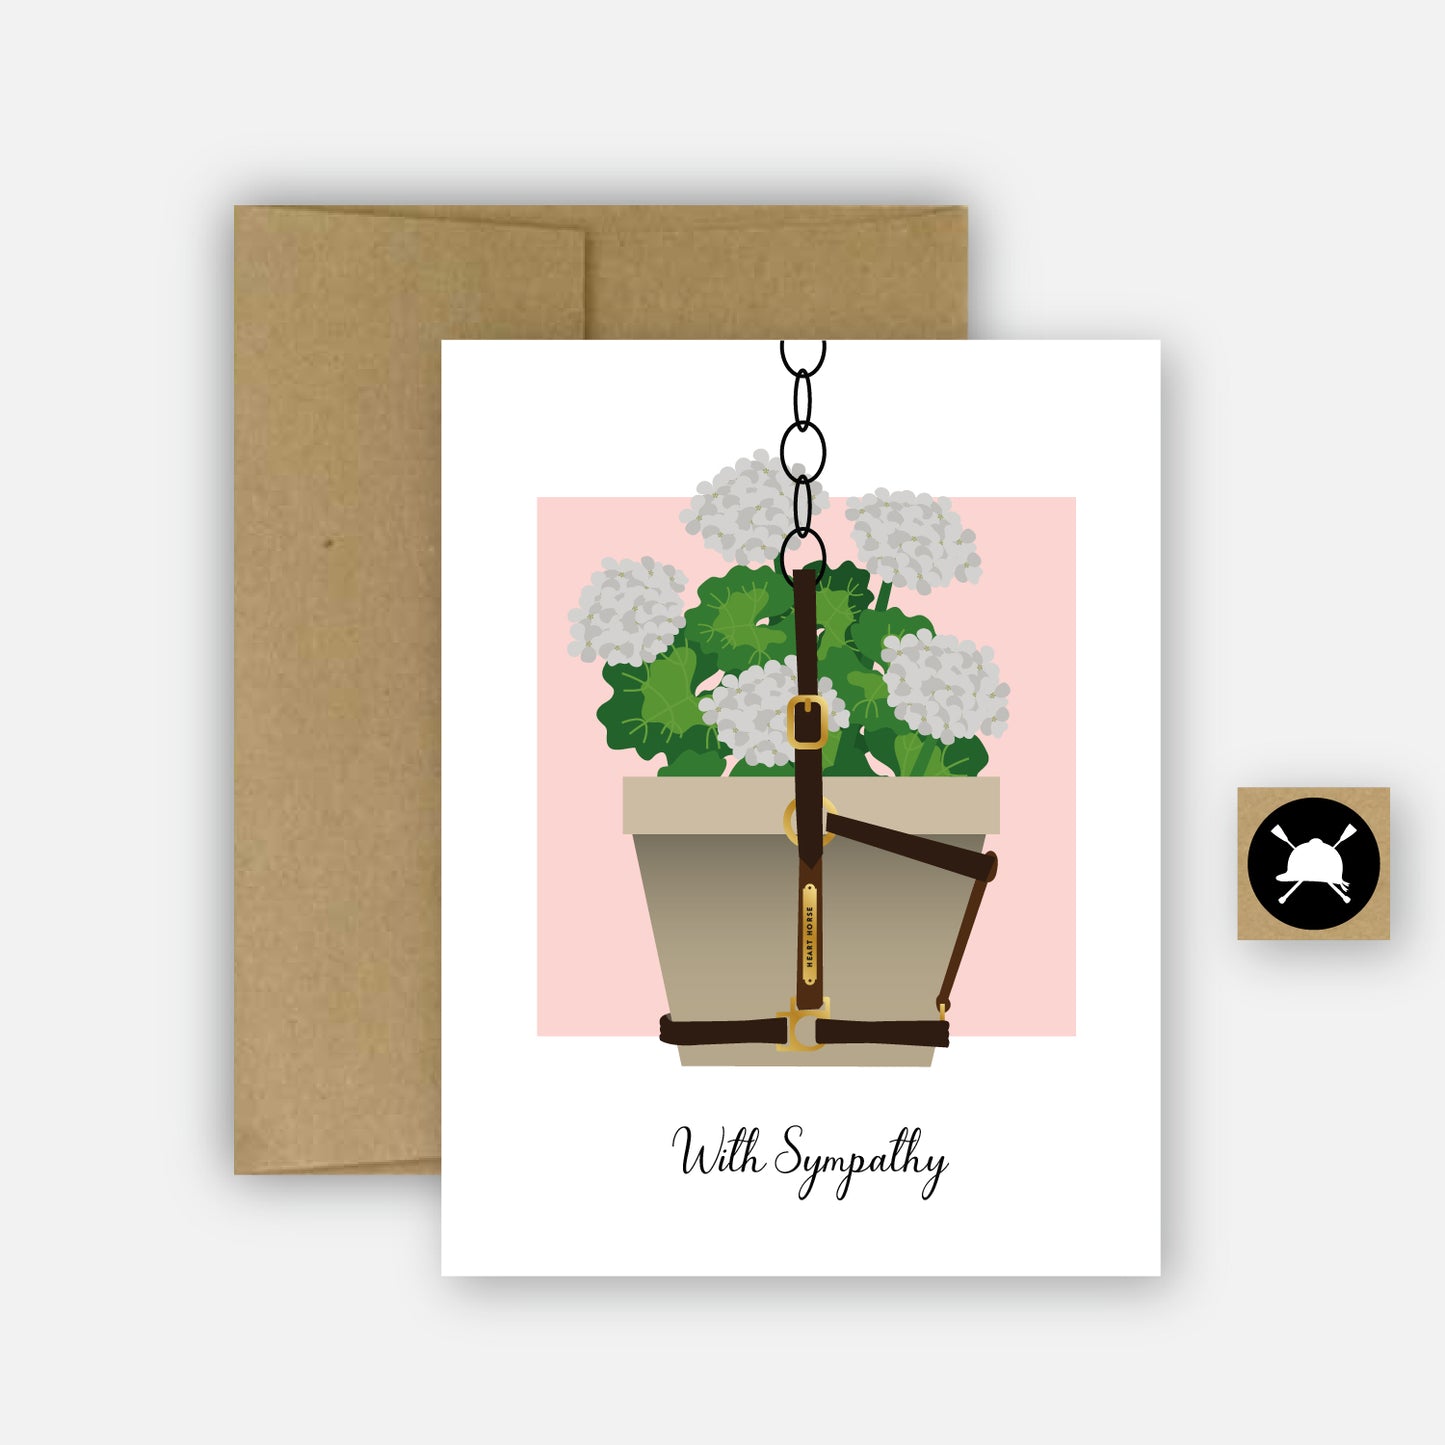 With Sympathy - Horse Grief Card